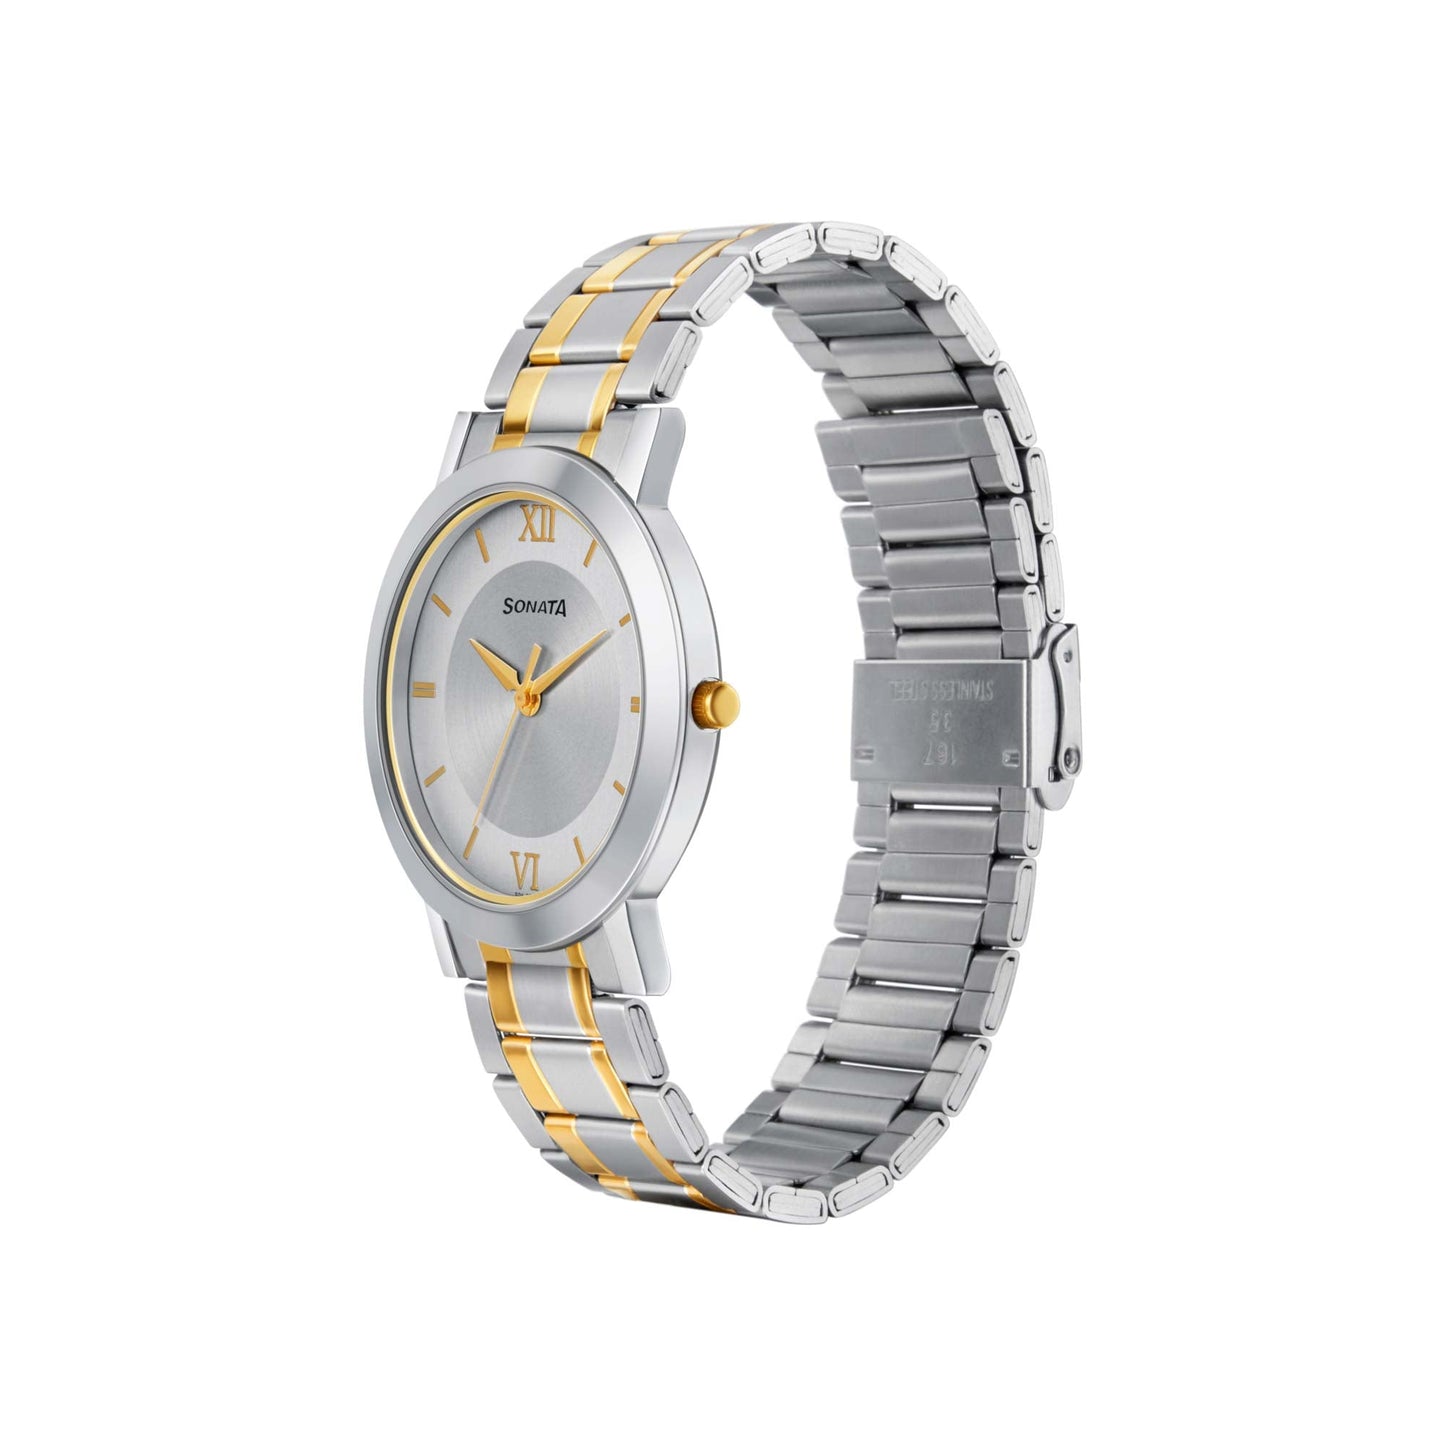 Sonata Quartz Analog with Date Grey Dial Stainless Steel Strap Watch for Men